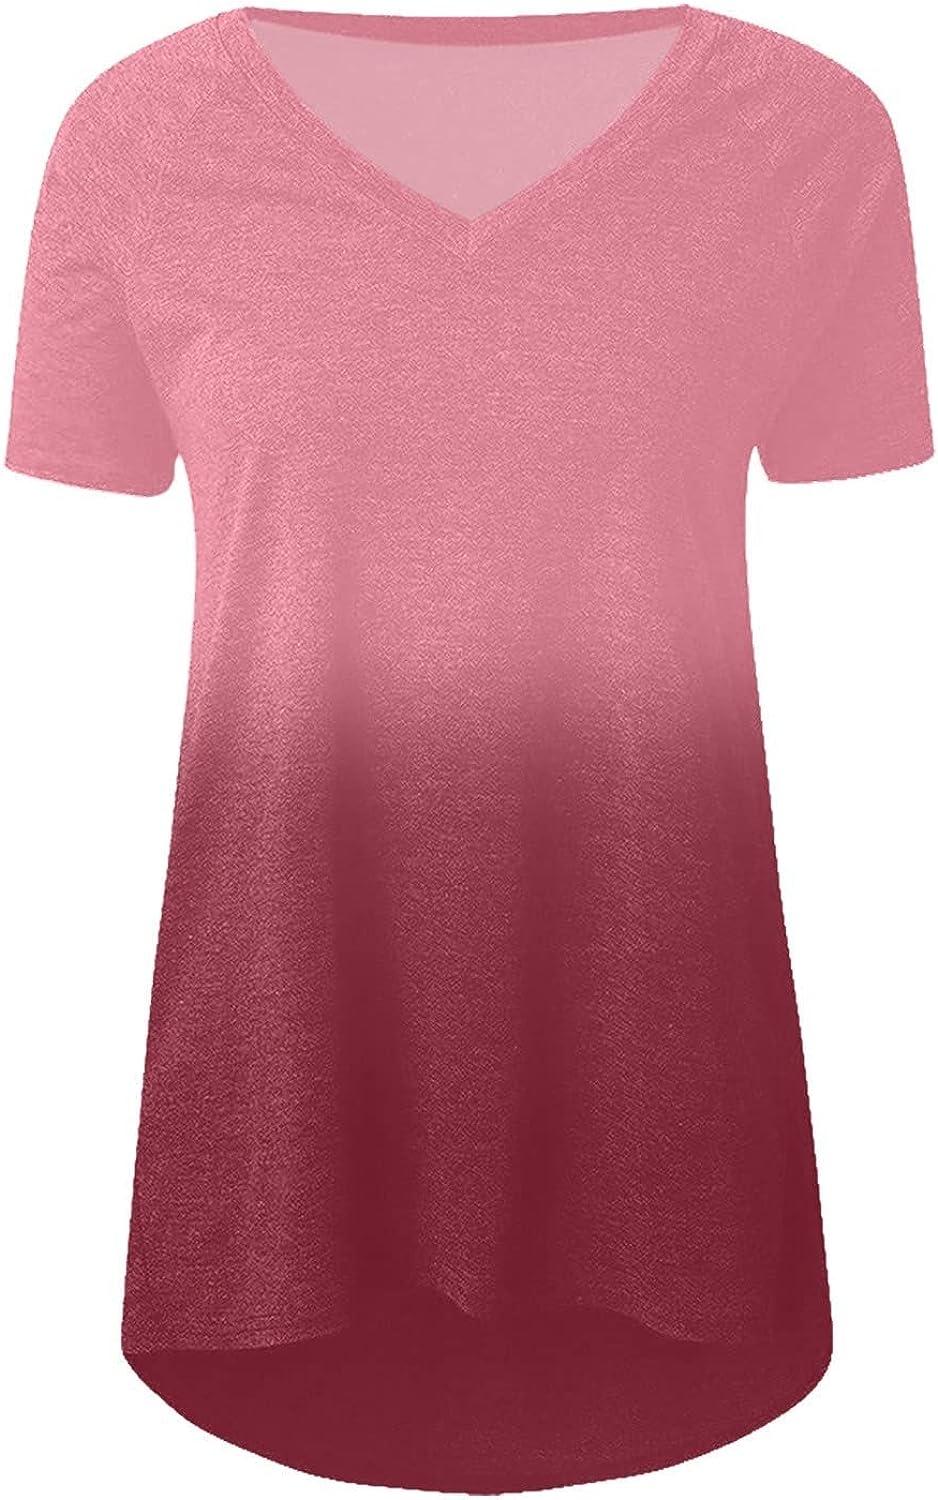 ABABC Women's Tops for Leggings,Dressy Casual Ombre Print V-Neck T Shirts  That Hide Belly Fat Loose Flowy Tunic Blouses Medium Pink